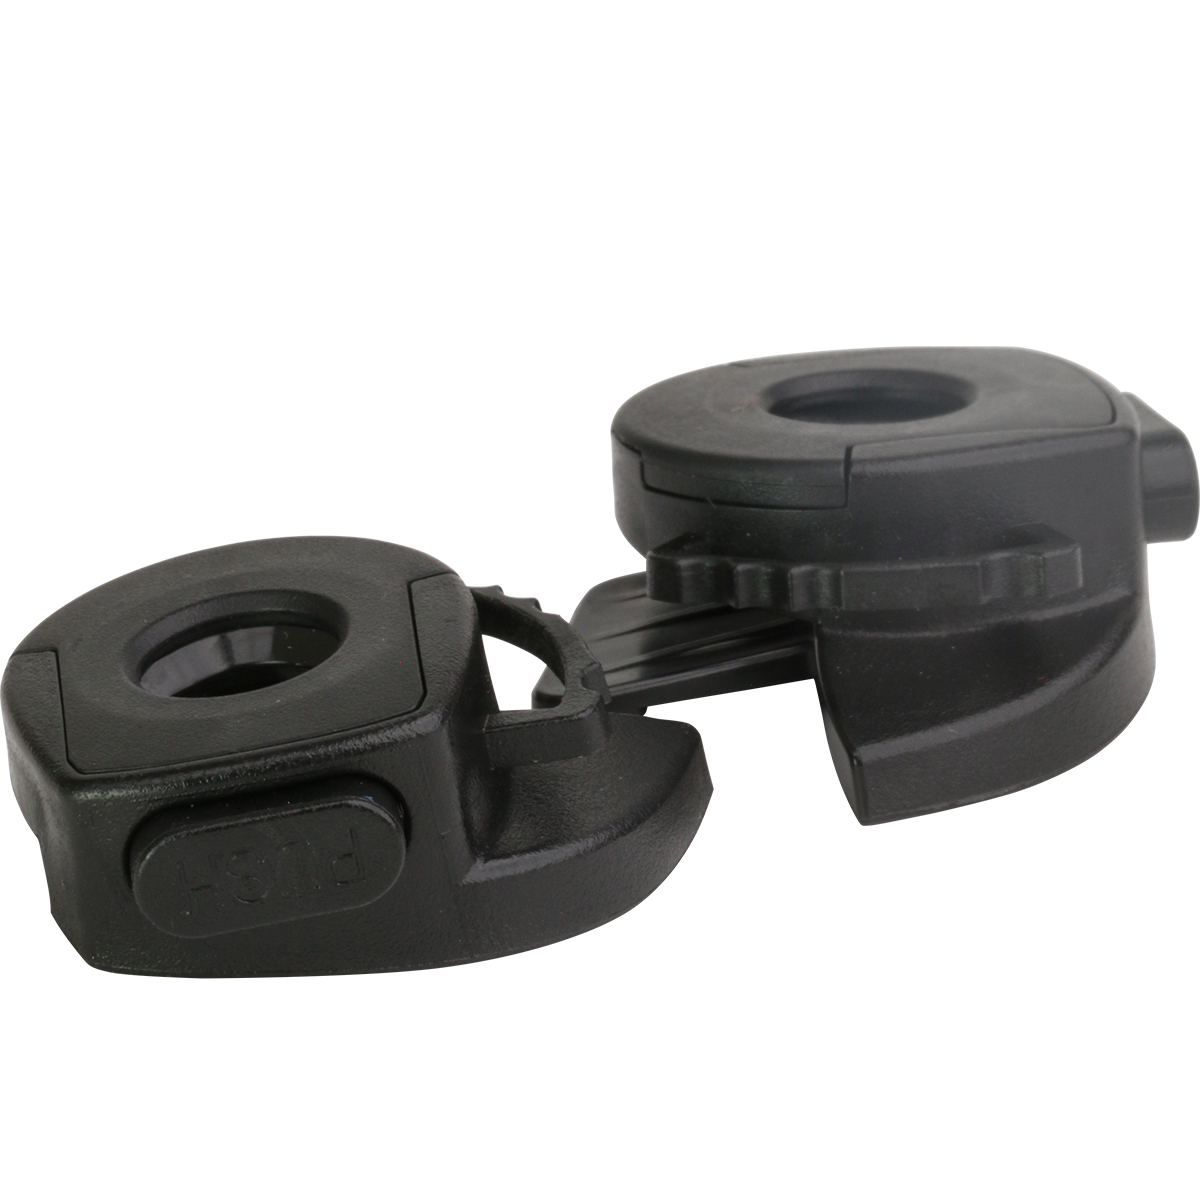 TRAVERSE REPLACMENT EYE SHIELD CONNECTOR - Traverse Accessories